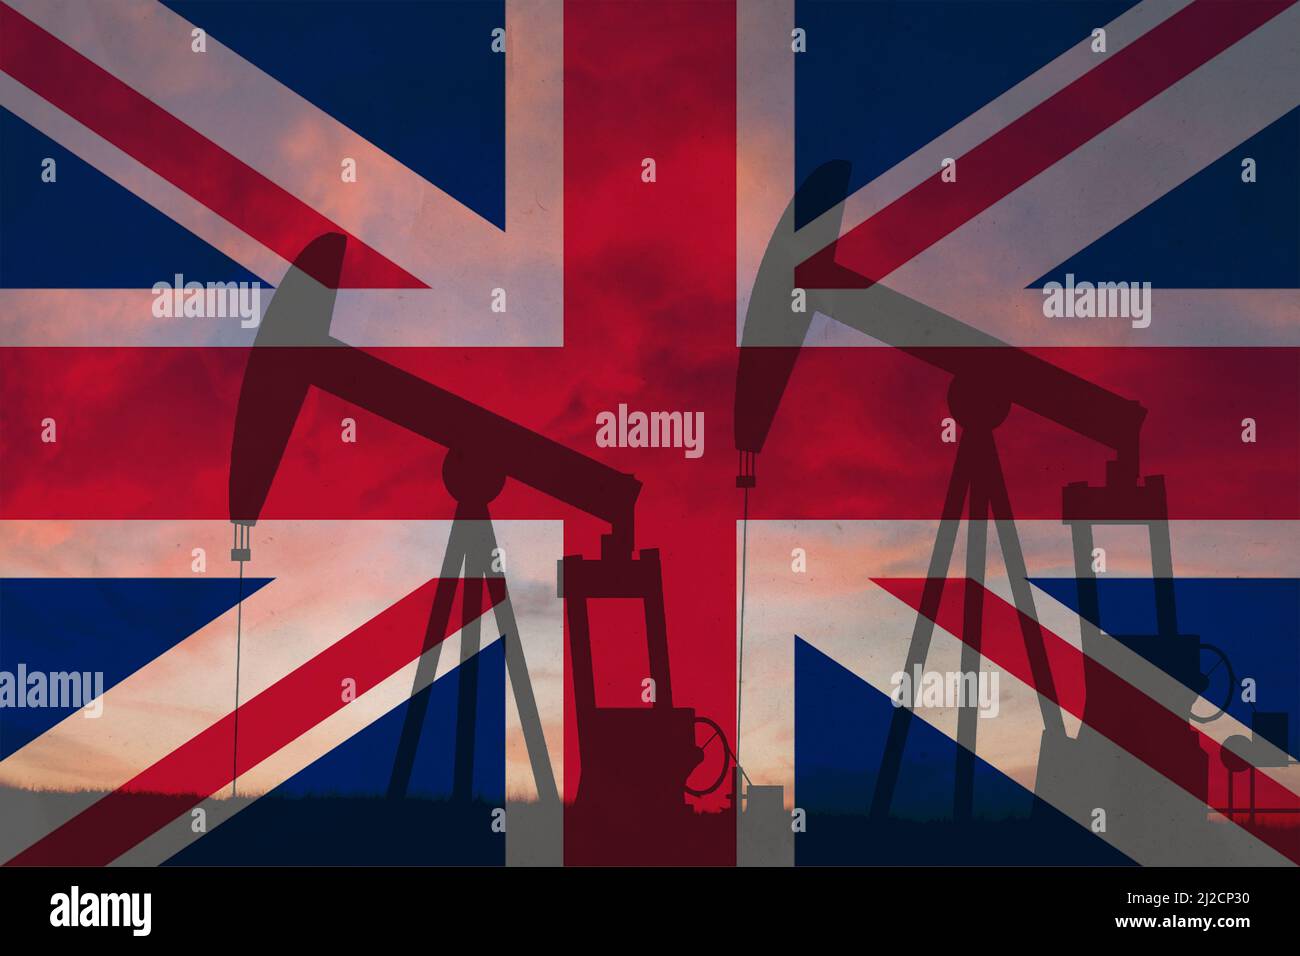 United Kingdom oil industry concept, industrial illustration. United Kingdom flag and oil wells, stock market, exchange economy and trade, oil product Stock Photo